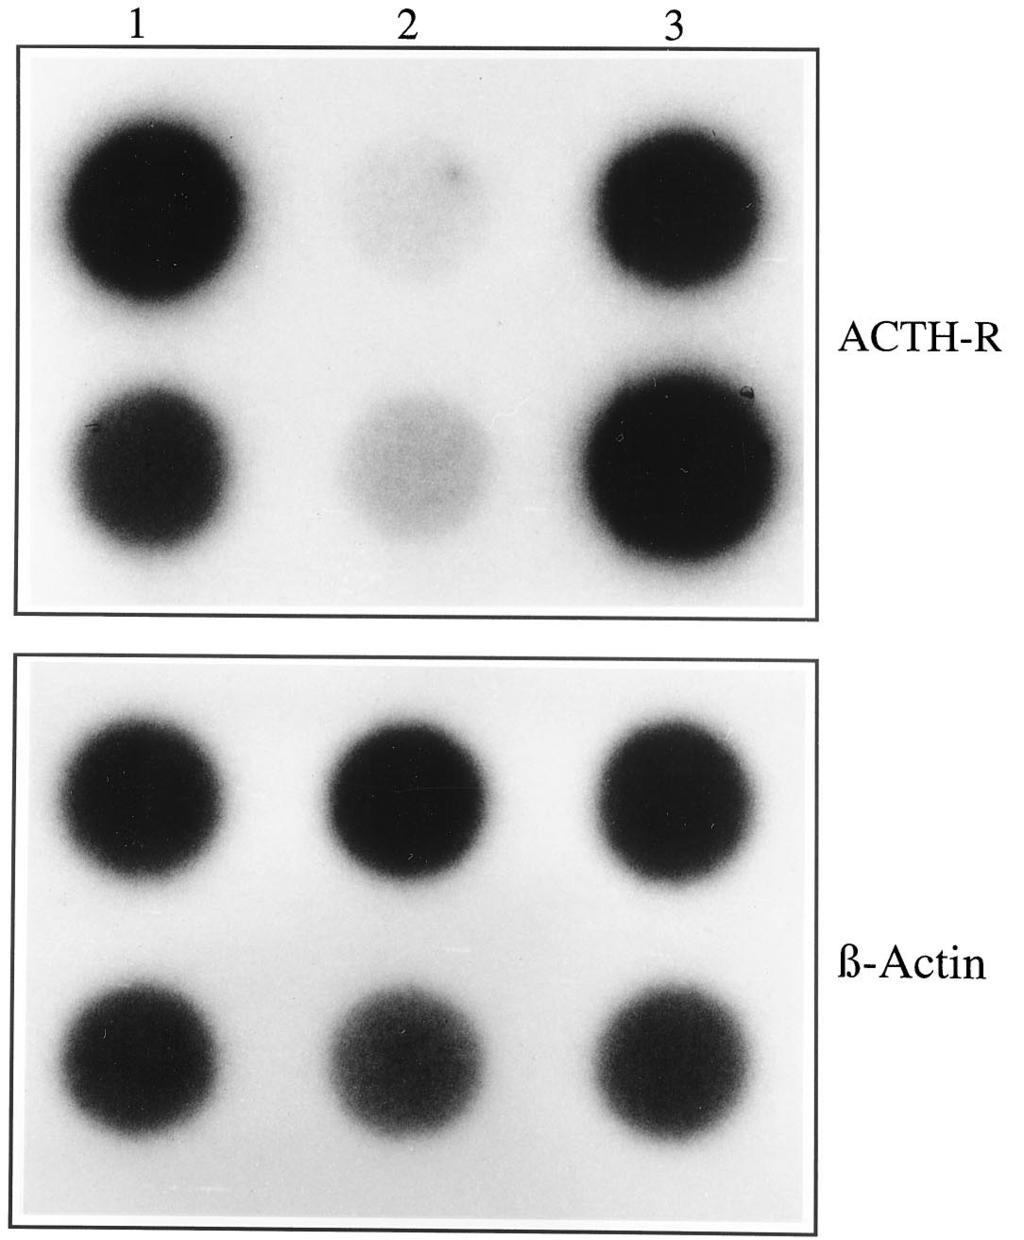 Left, Adrenal adenoma without LOH. FIG. 4. ACTH-R mrna expression in adrenocortical tumors assessed by dot blot.